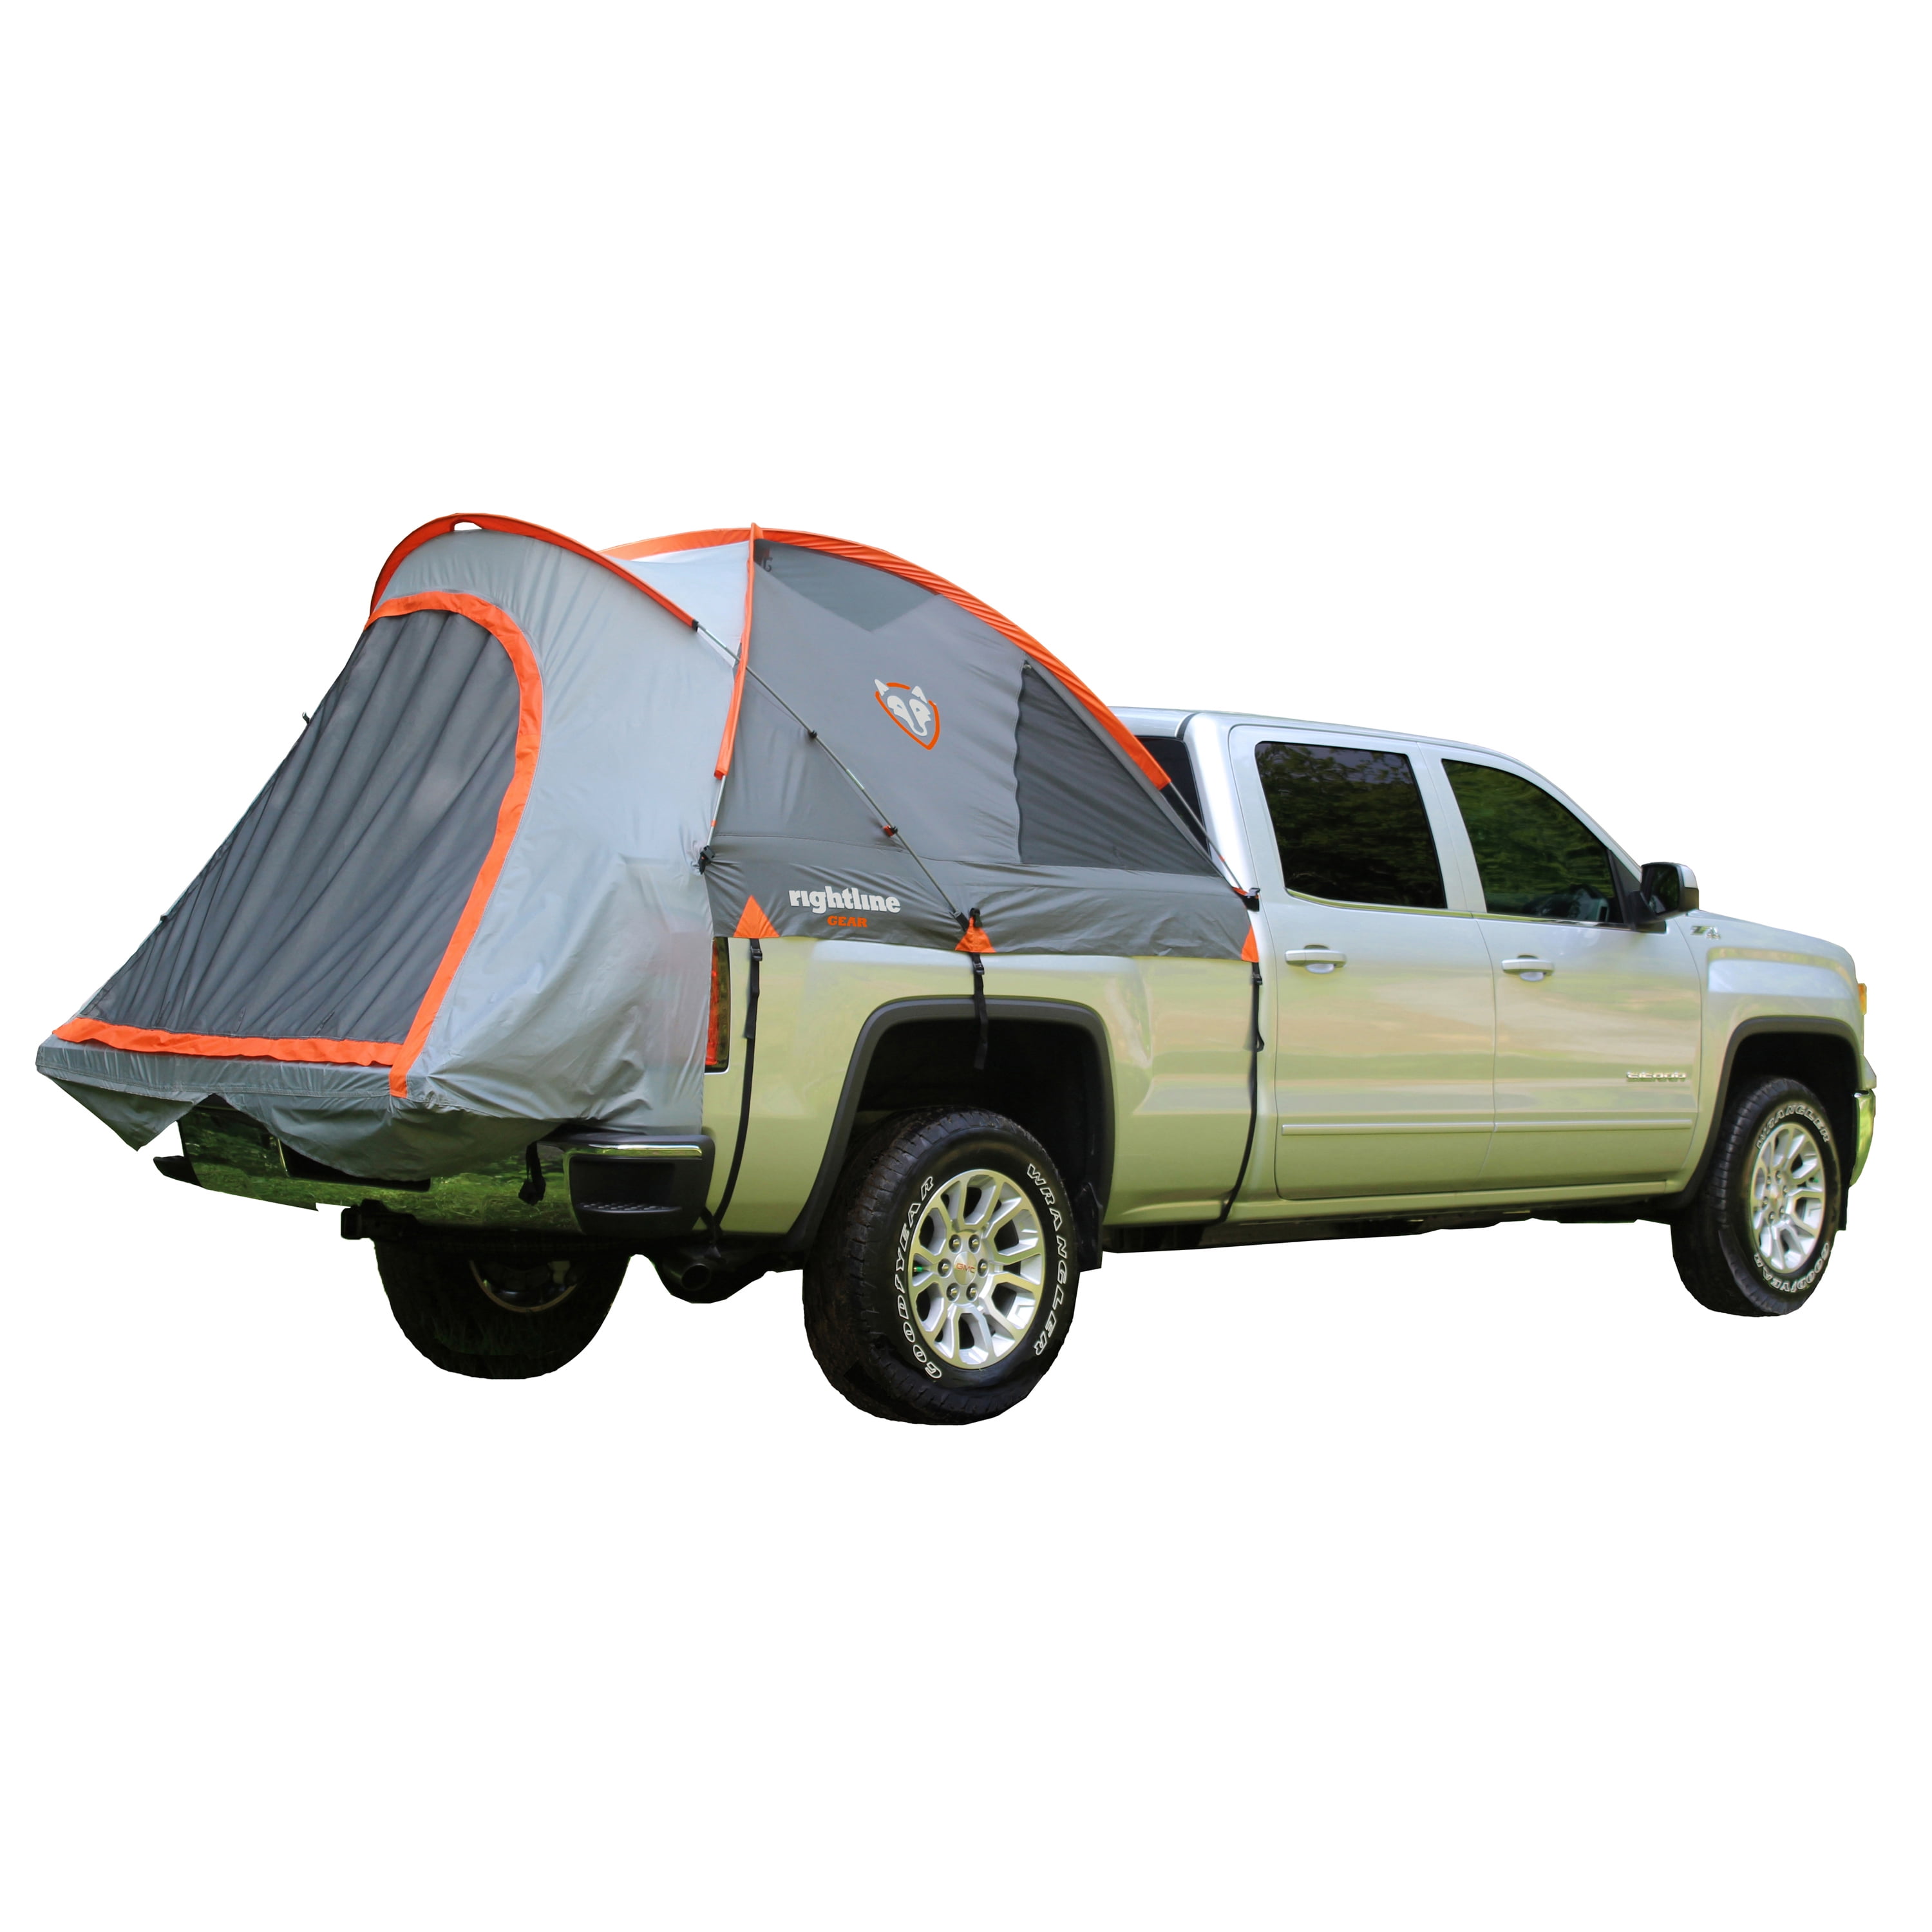 72"-73" Fits Compact Truck Regular Bed Pickup Truck Bed Camping Tent Sleeps 2 